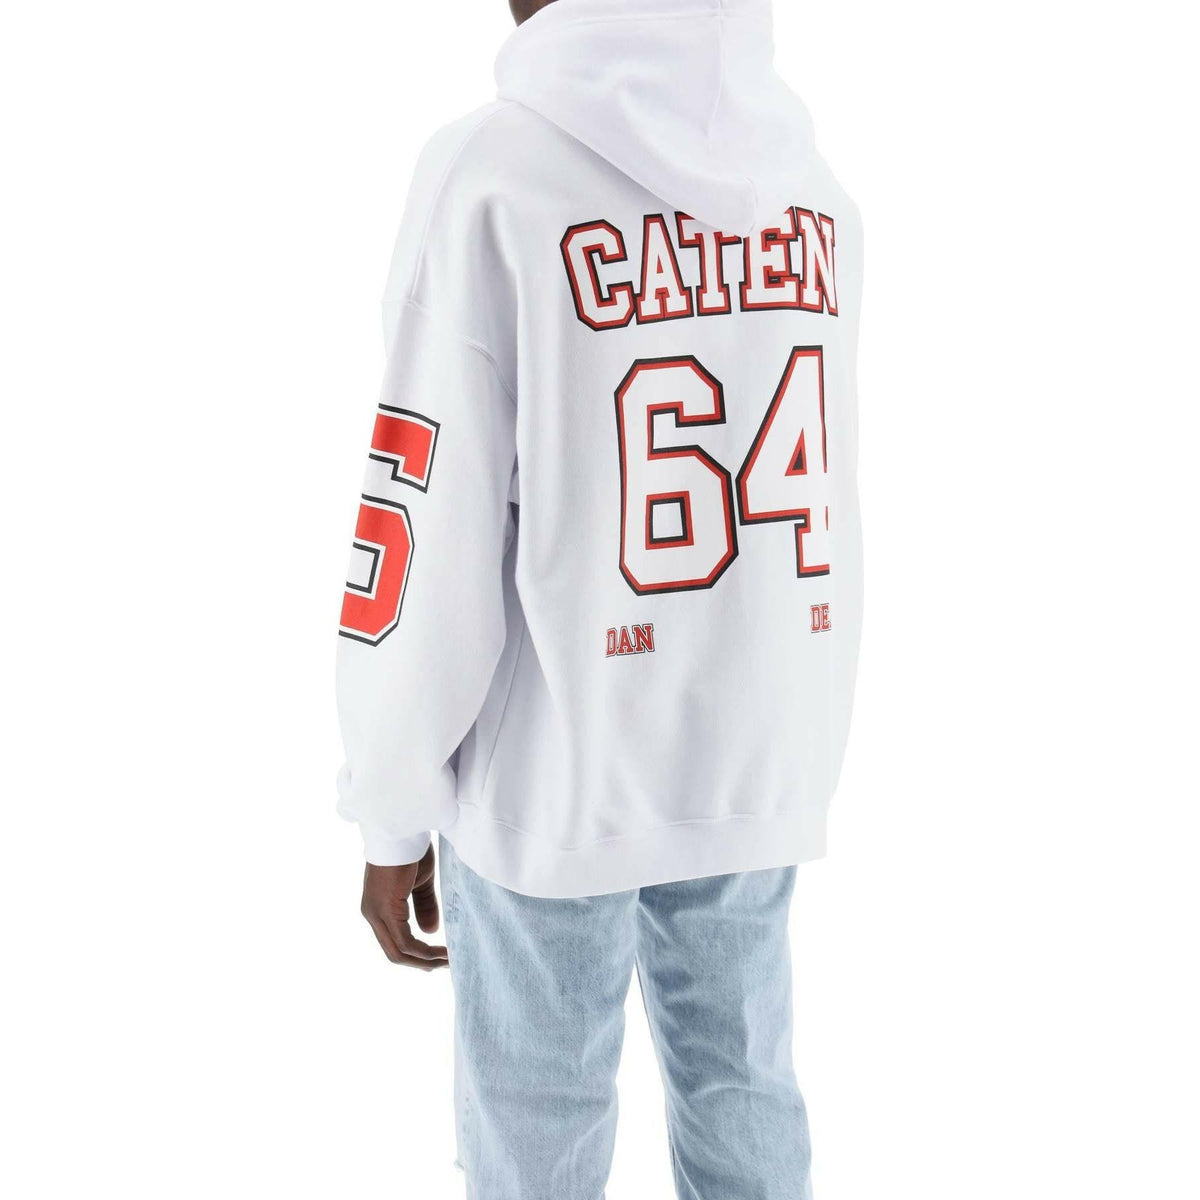 White Hooded Caten 64 Cotton Sweatshirt With Numerical Prints DSQUARED2 JOHN JULIA.